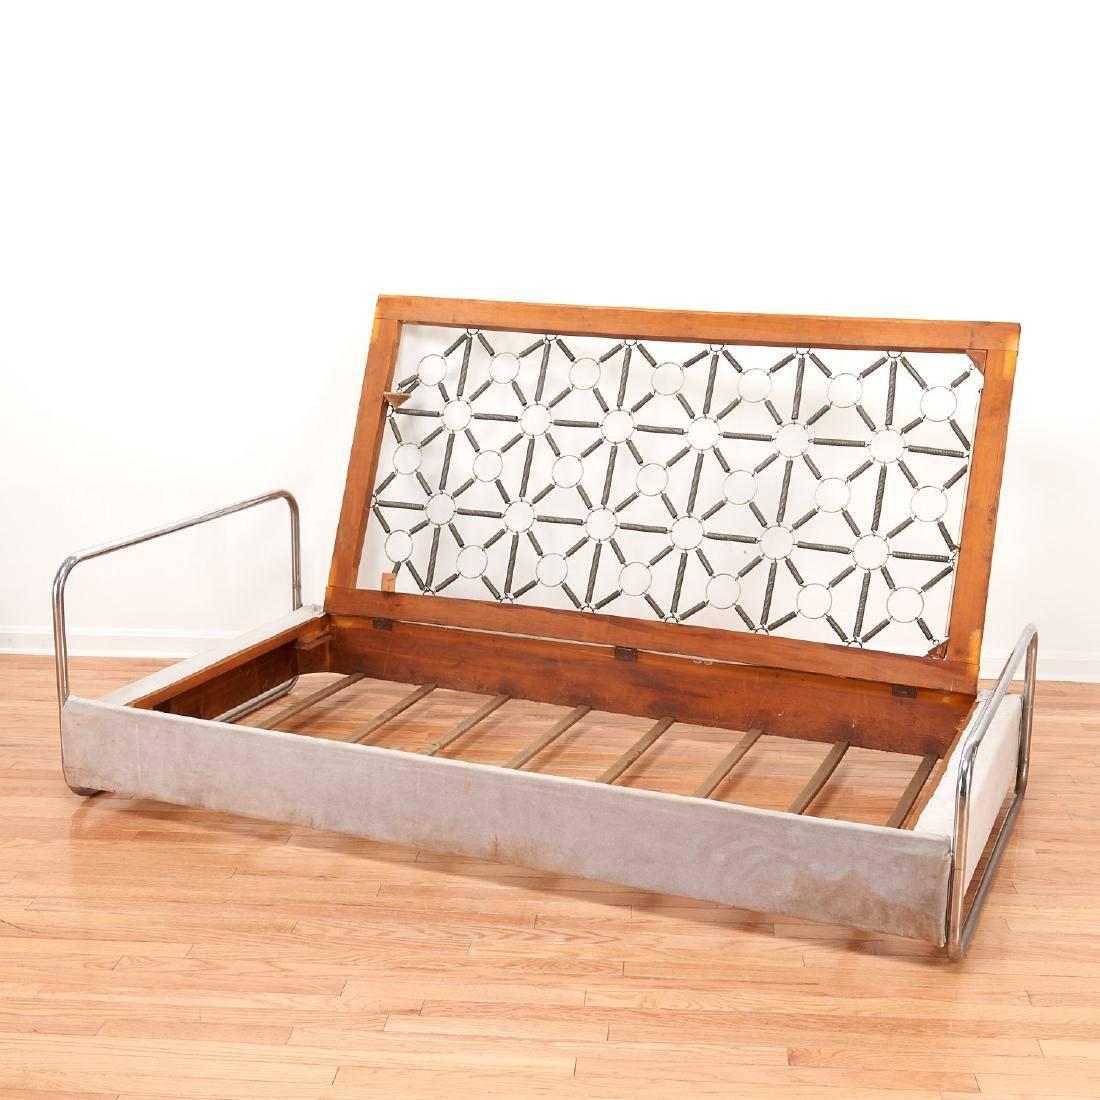 Amazing Marcel Breuer style daybed. Tubular chrome at both ends. Bed has hinges which allow it to be lifted, allowing for storage underneath. Great piece of design. Fantastic spring design. Fabric is original but can be replaced for small fee.